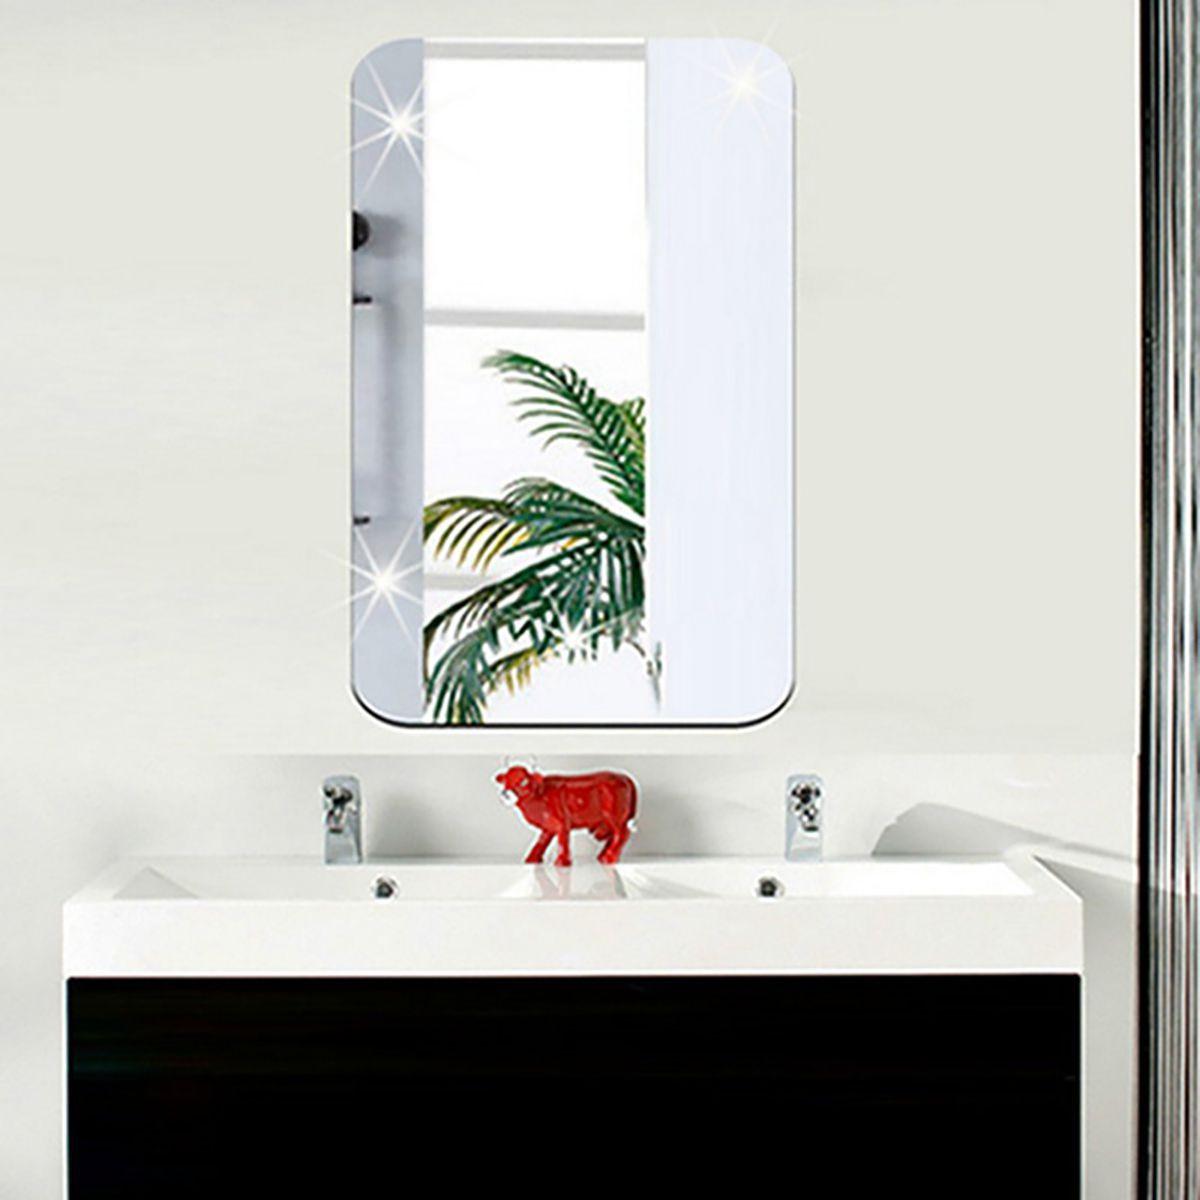 3D DIY Home Bathroom Decoration Acrylic Reflective Surface Wall Mirror Stickers HOG-Home Office Garden online marketplace.